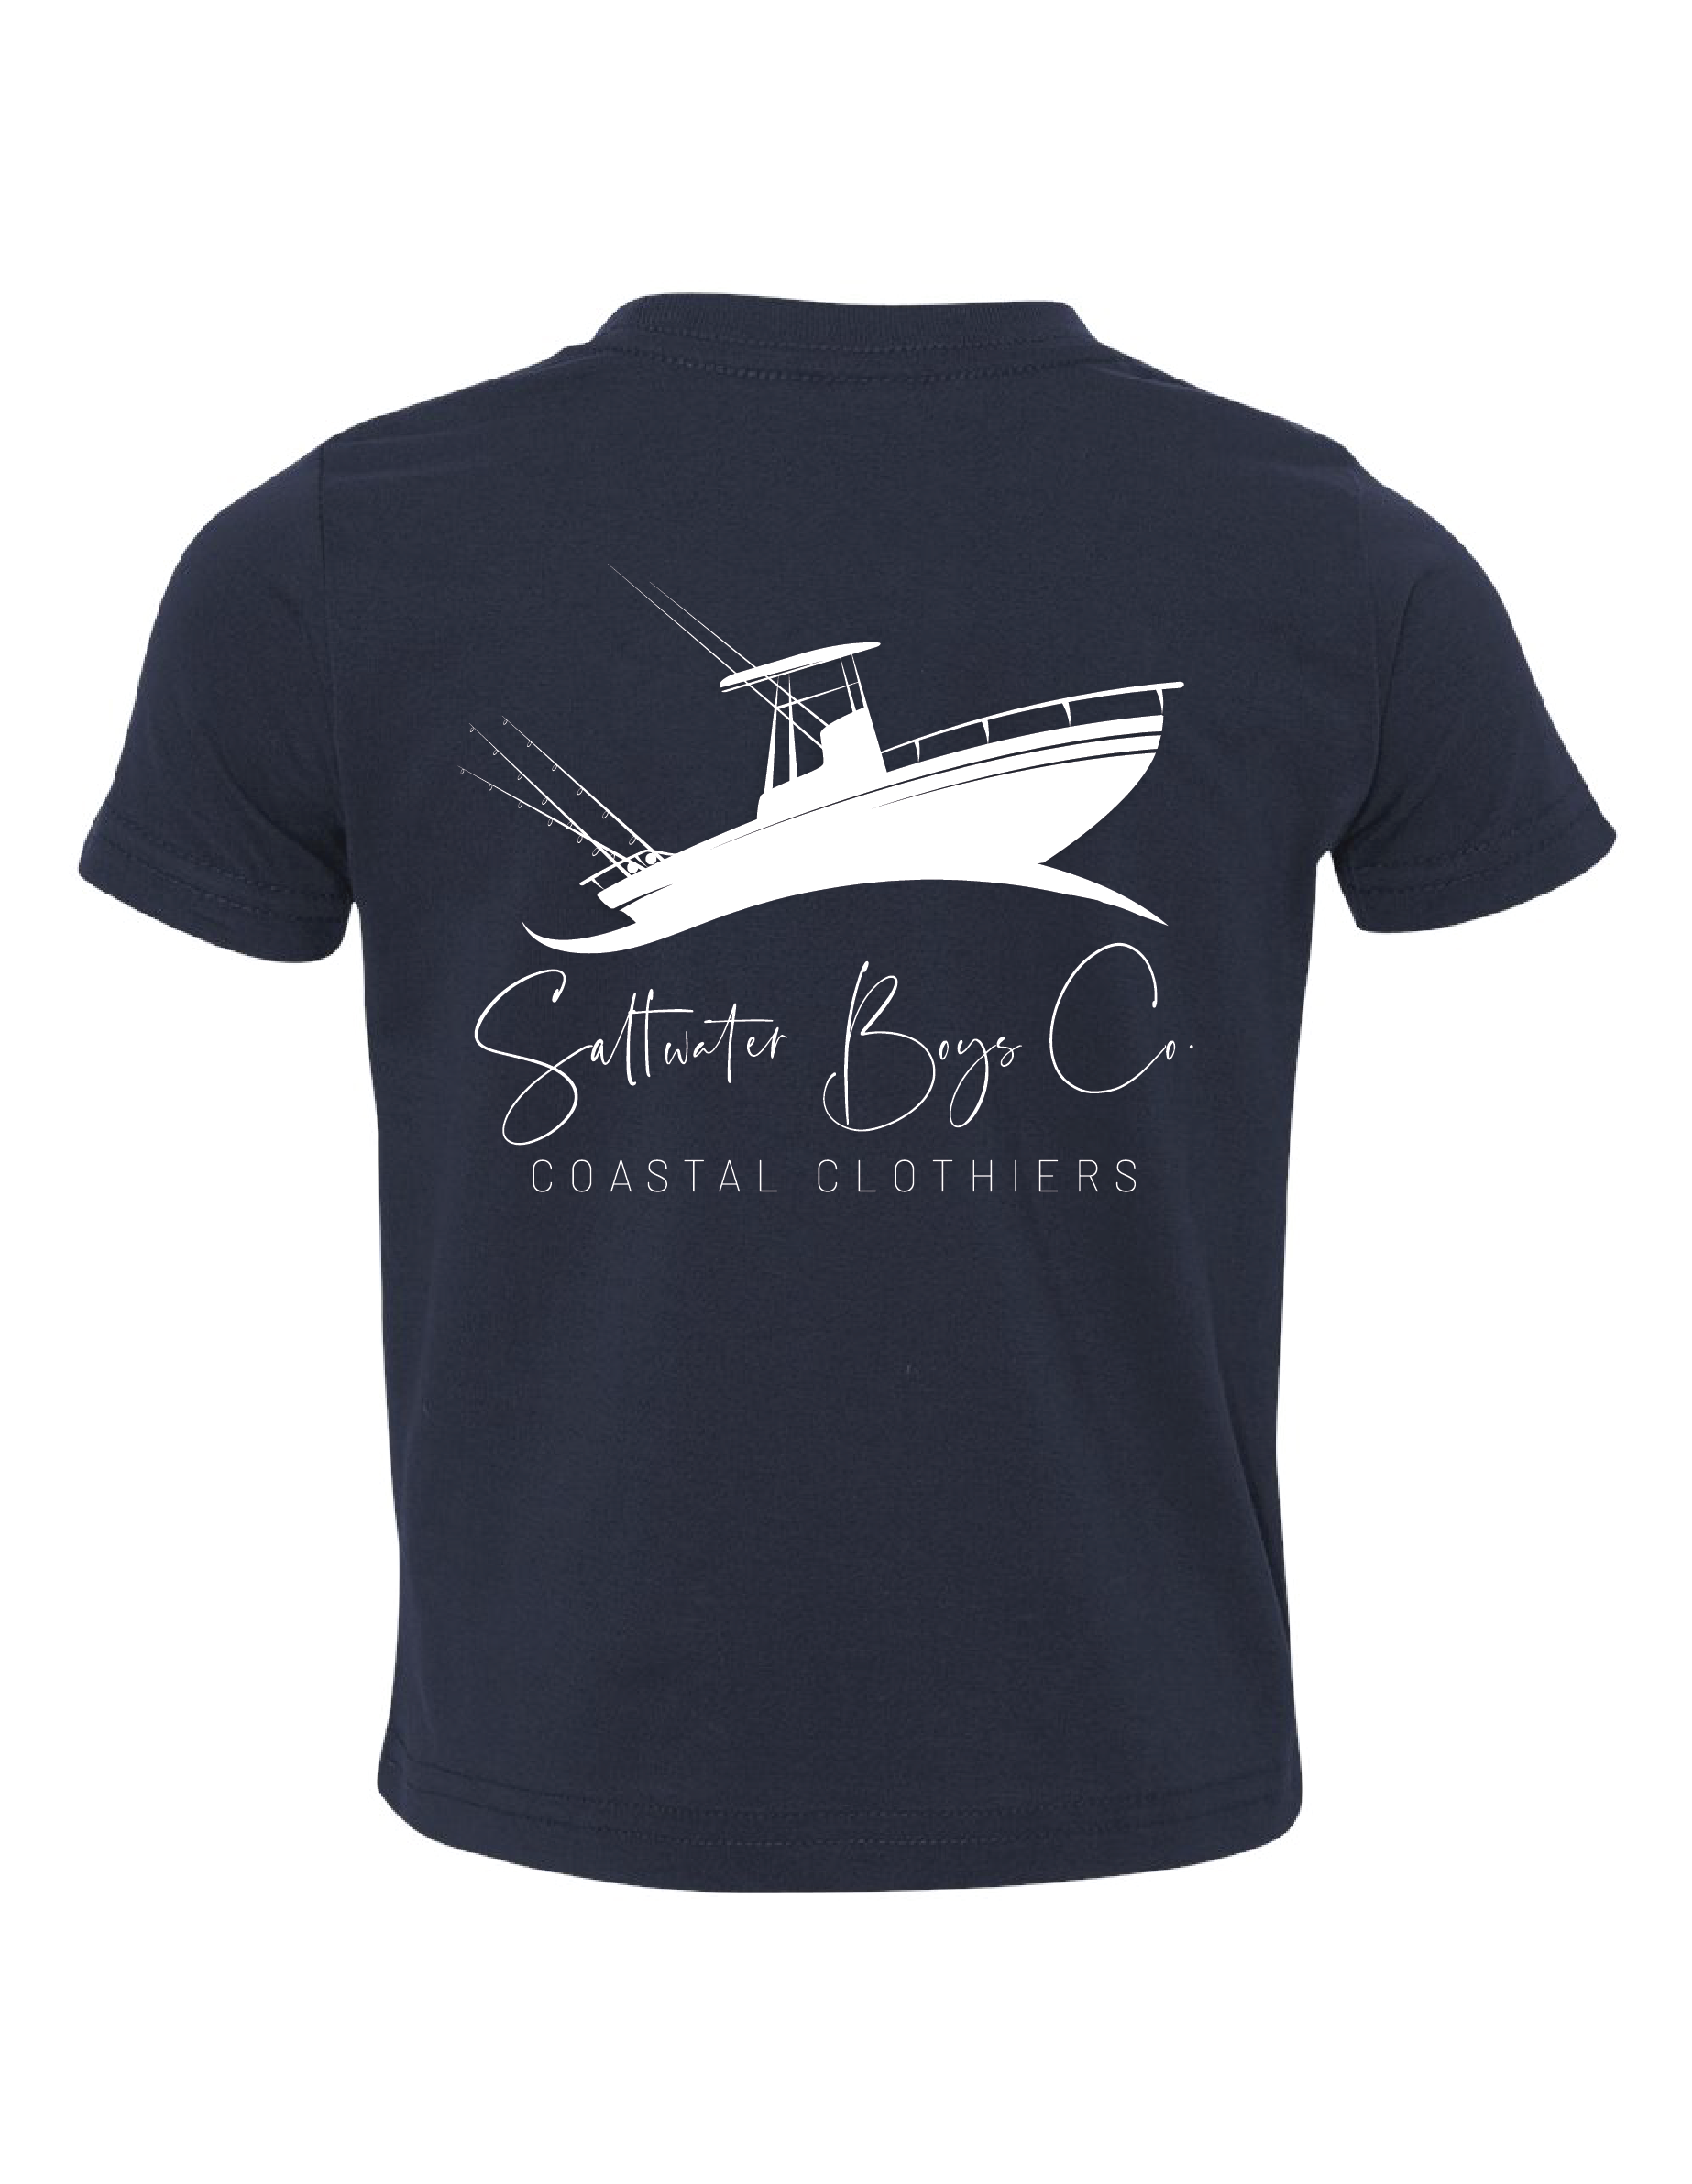 Offshore Boat Graphic Tee